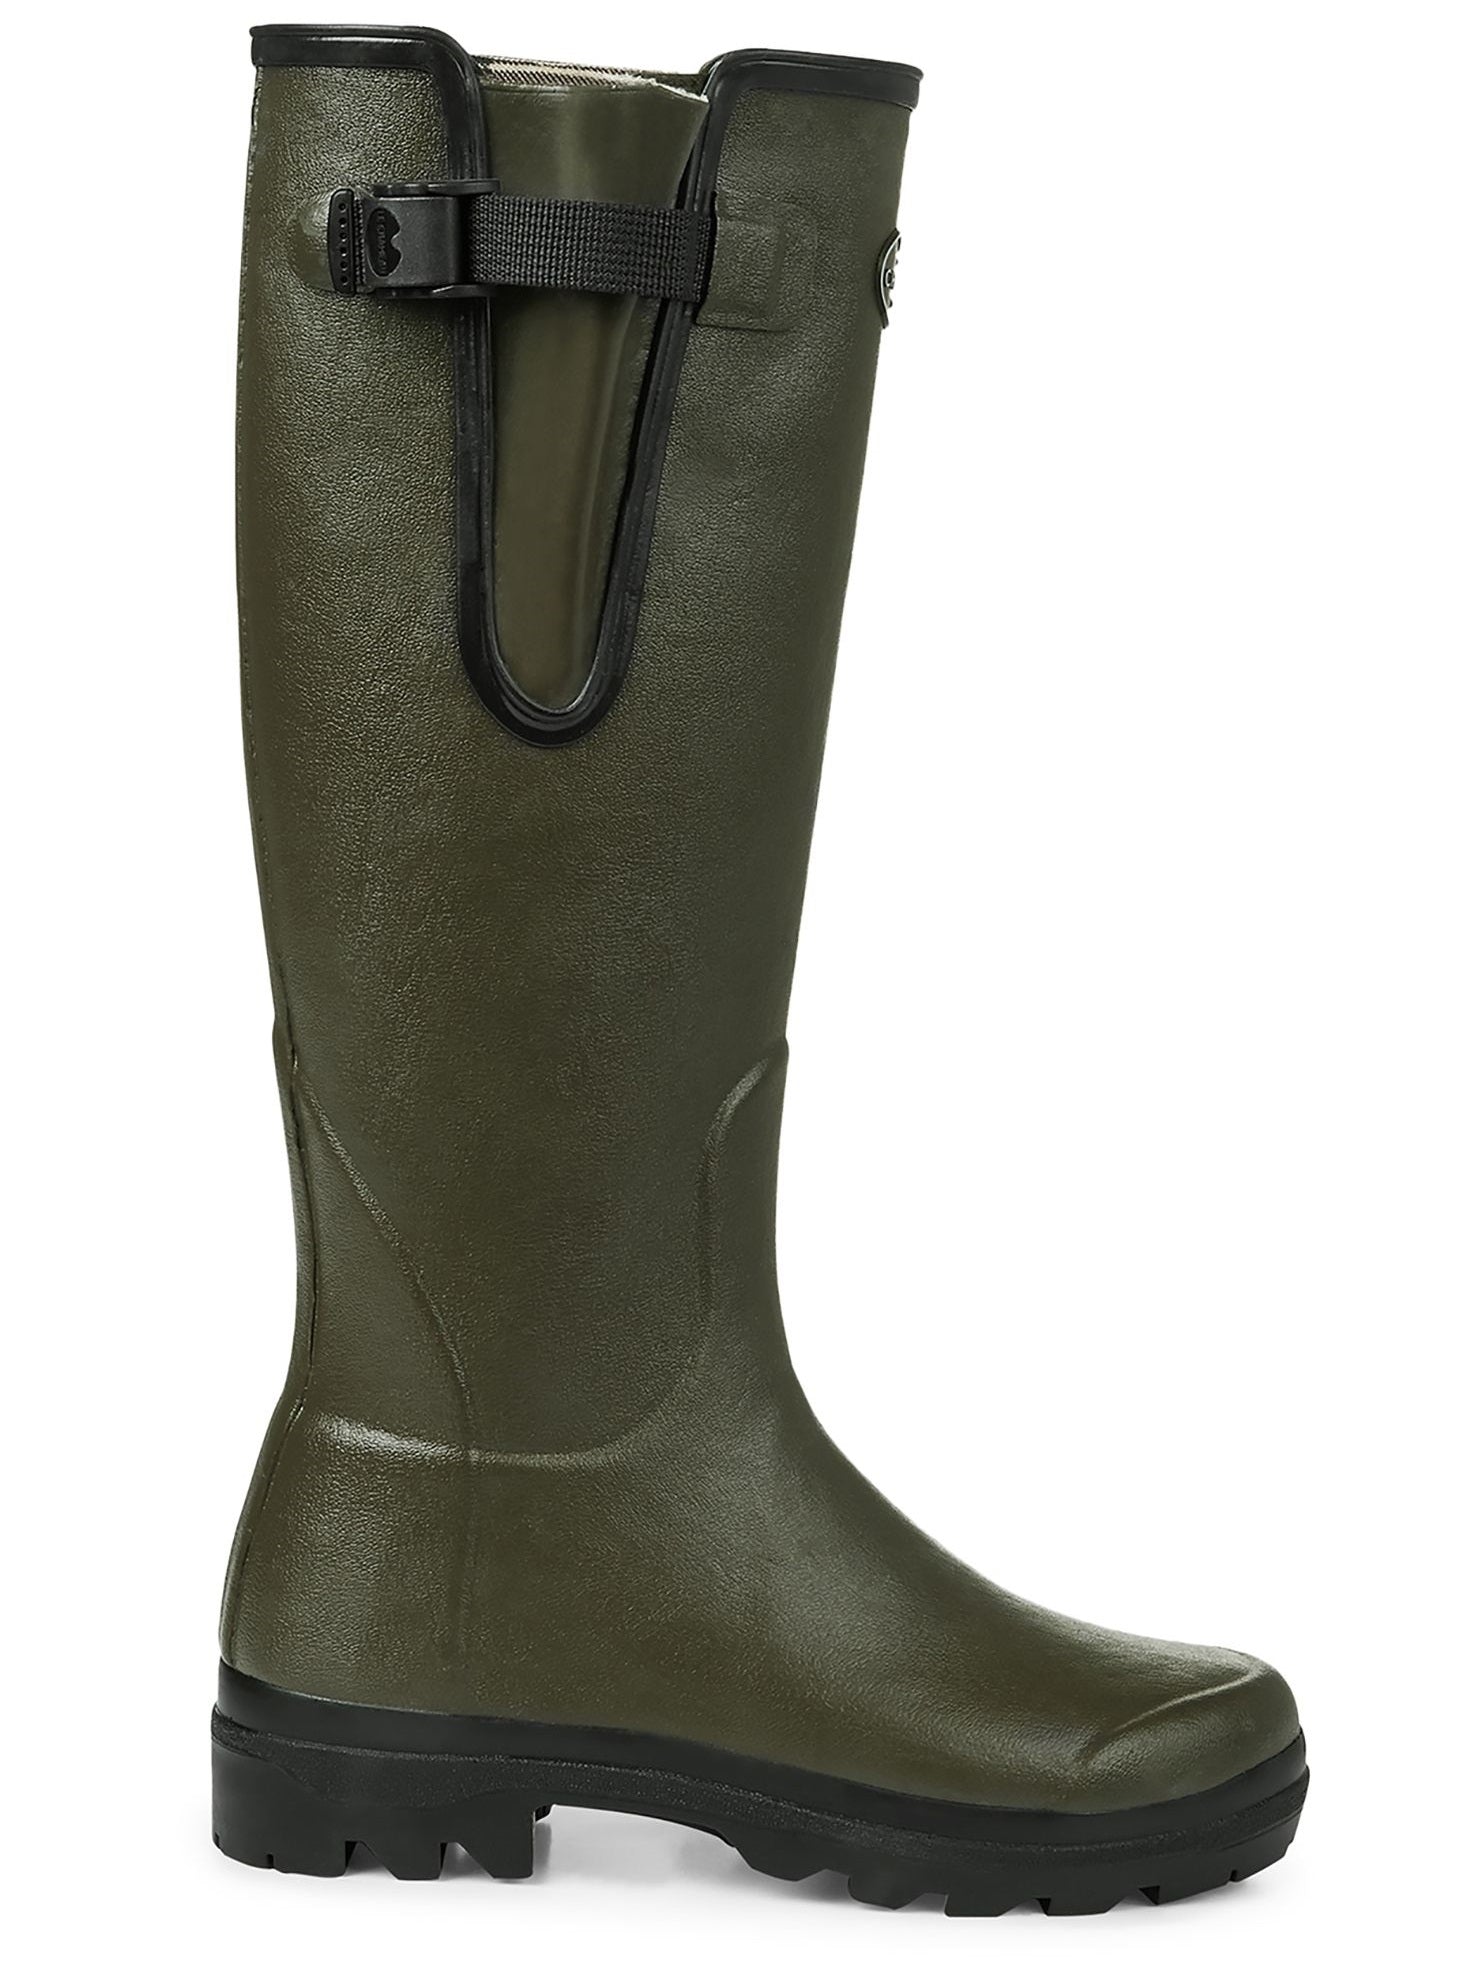 LE CHAMEAU Vierzon Boots - Ladies Jersey Lined - Dark Green